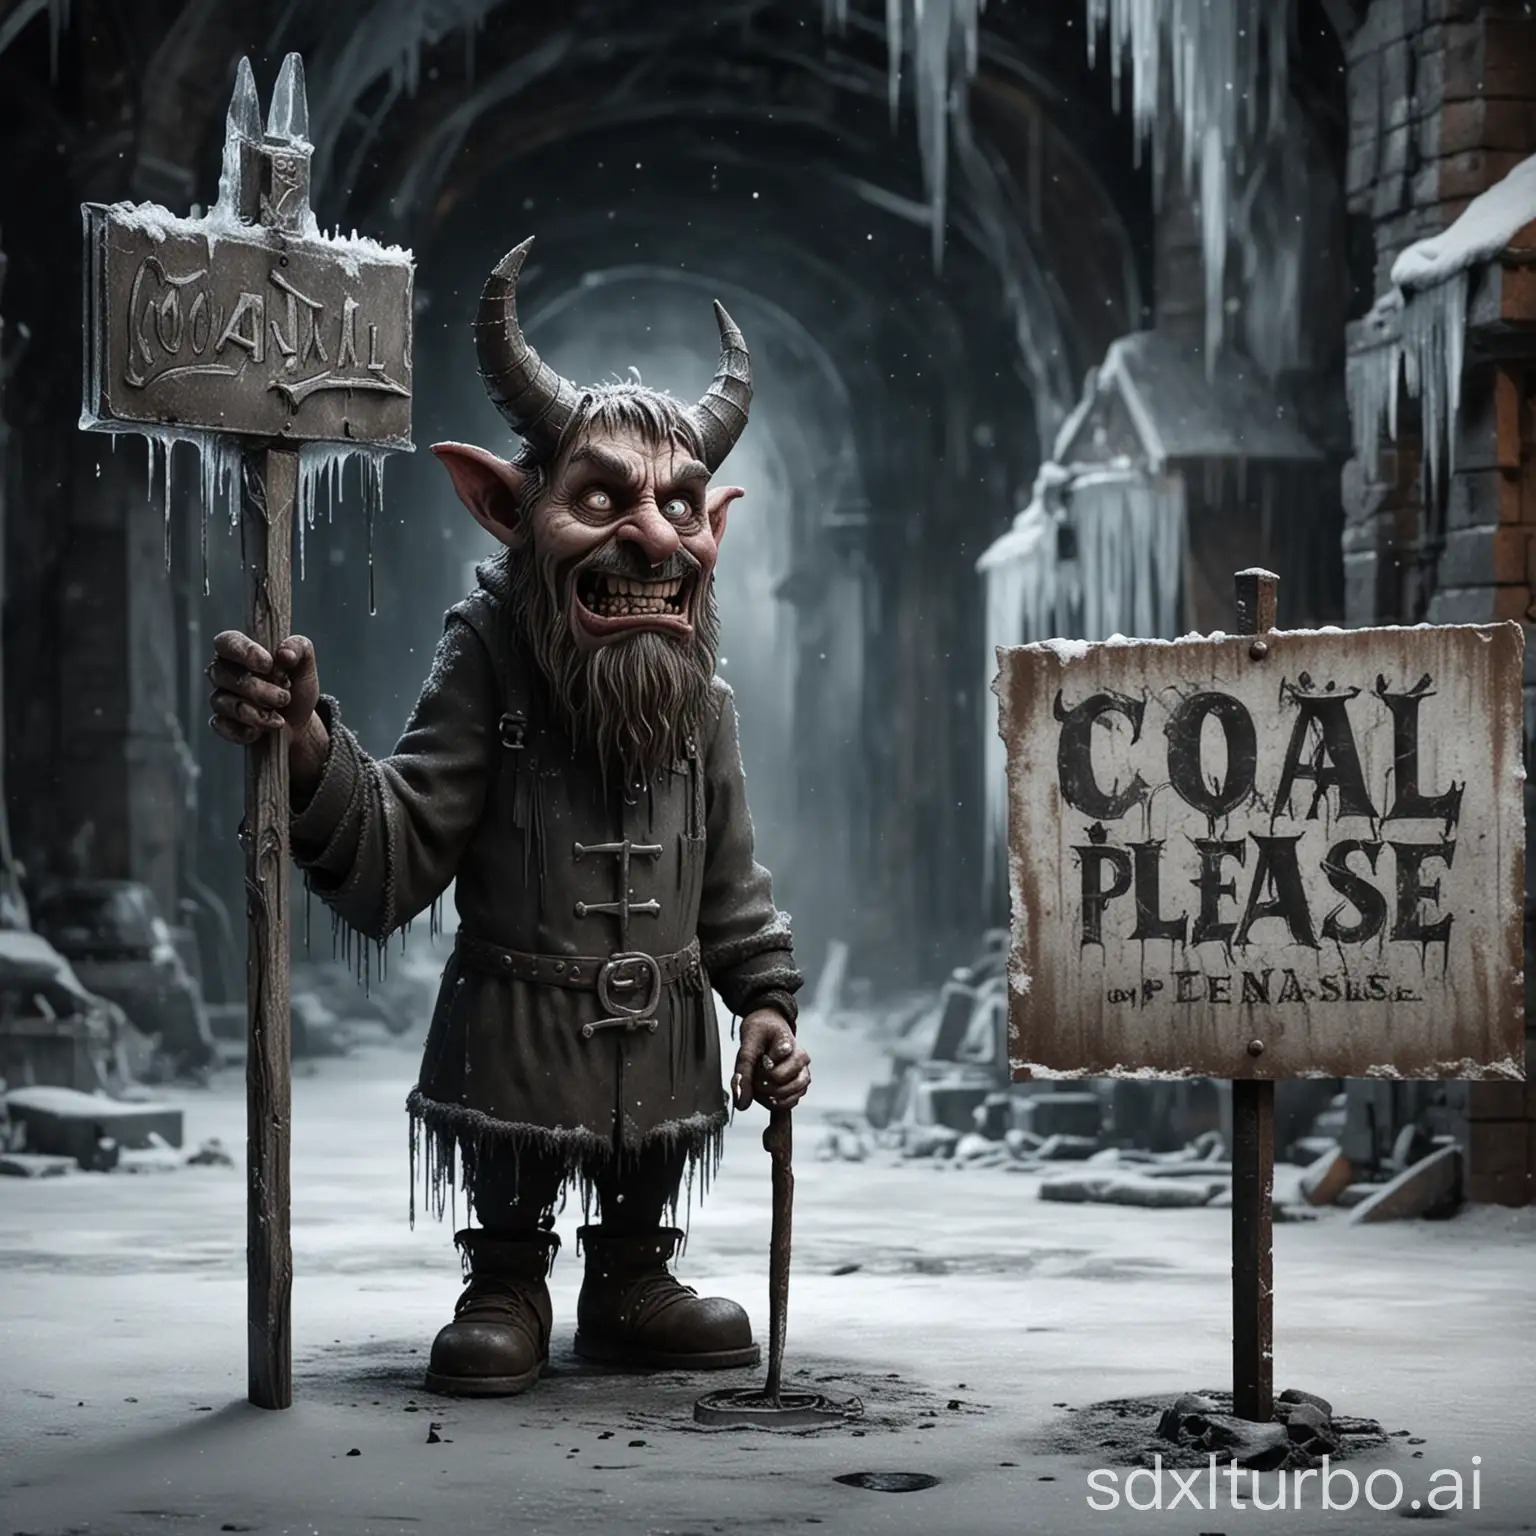 sad devil with branding iron, in frozen dungeon with icicles and industrial furnaces, begging, holding a sign 'Coal Please'